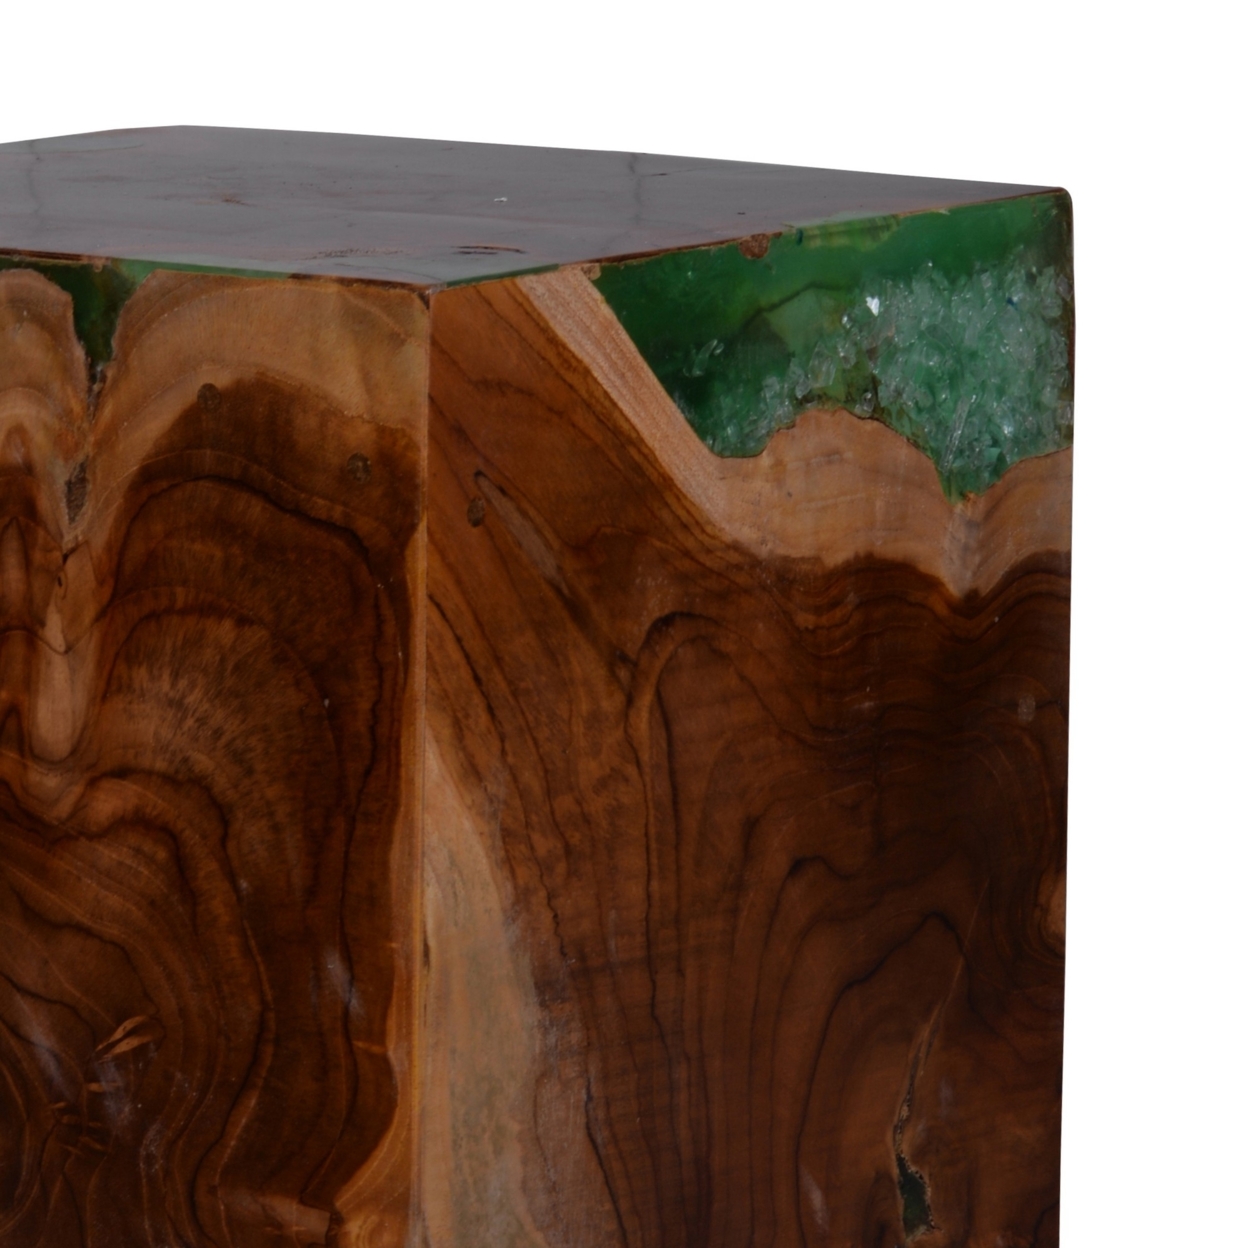 16 Inch Modern Accent Stool Table, Teak Wood Cube With Green Accents, Brown- Saltoro Sherpi